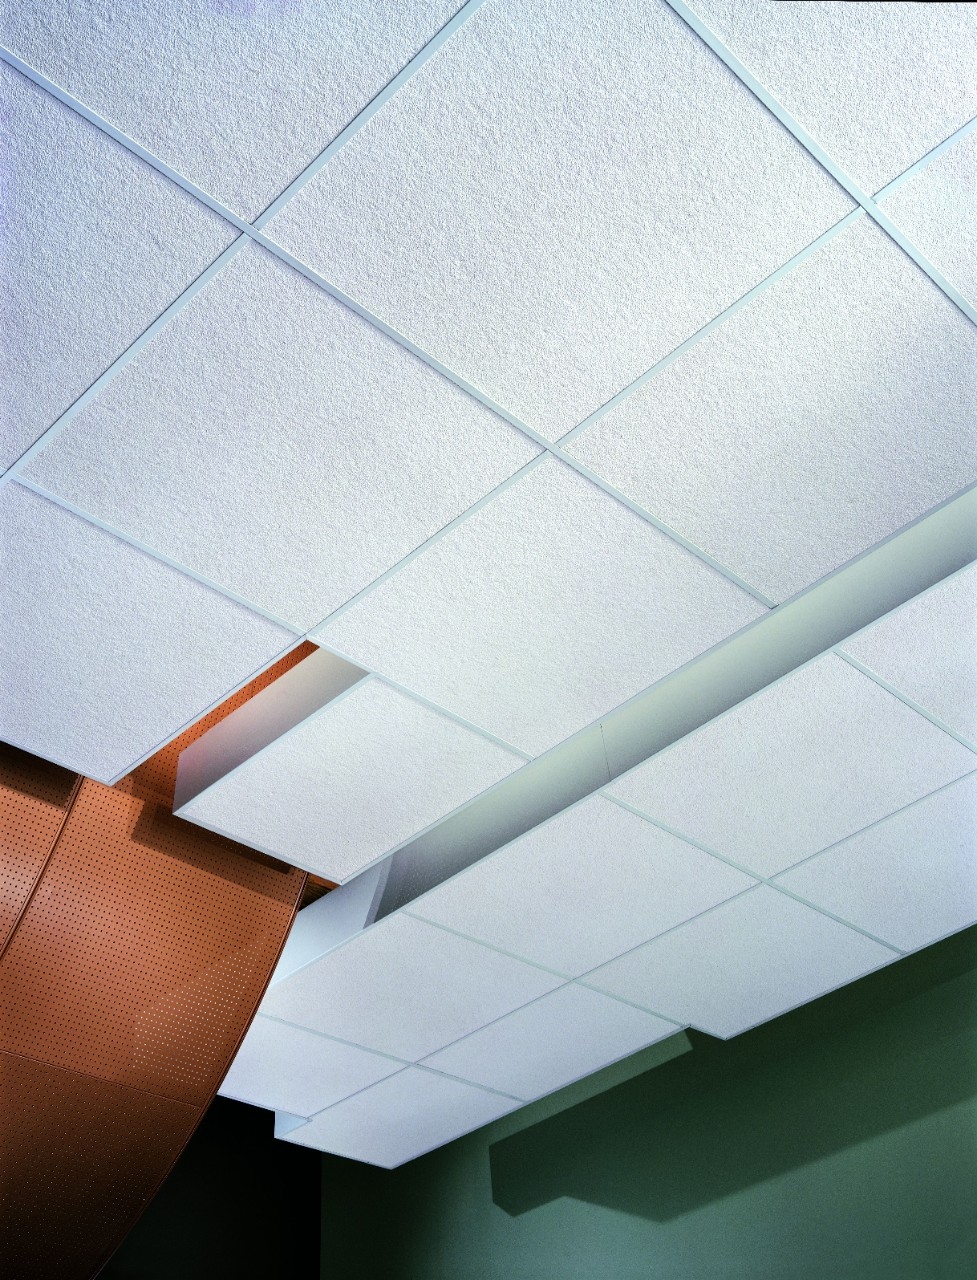 Fire Rated Ceiling Tiles 2x2 Fire Rated Ceiling Tiles 2×2 usg astro acoustical panels fire rated ceiling tiles 977 X 1280